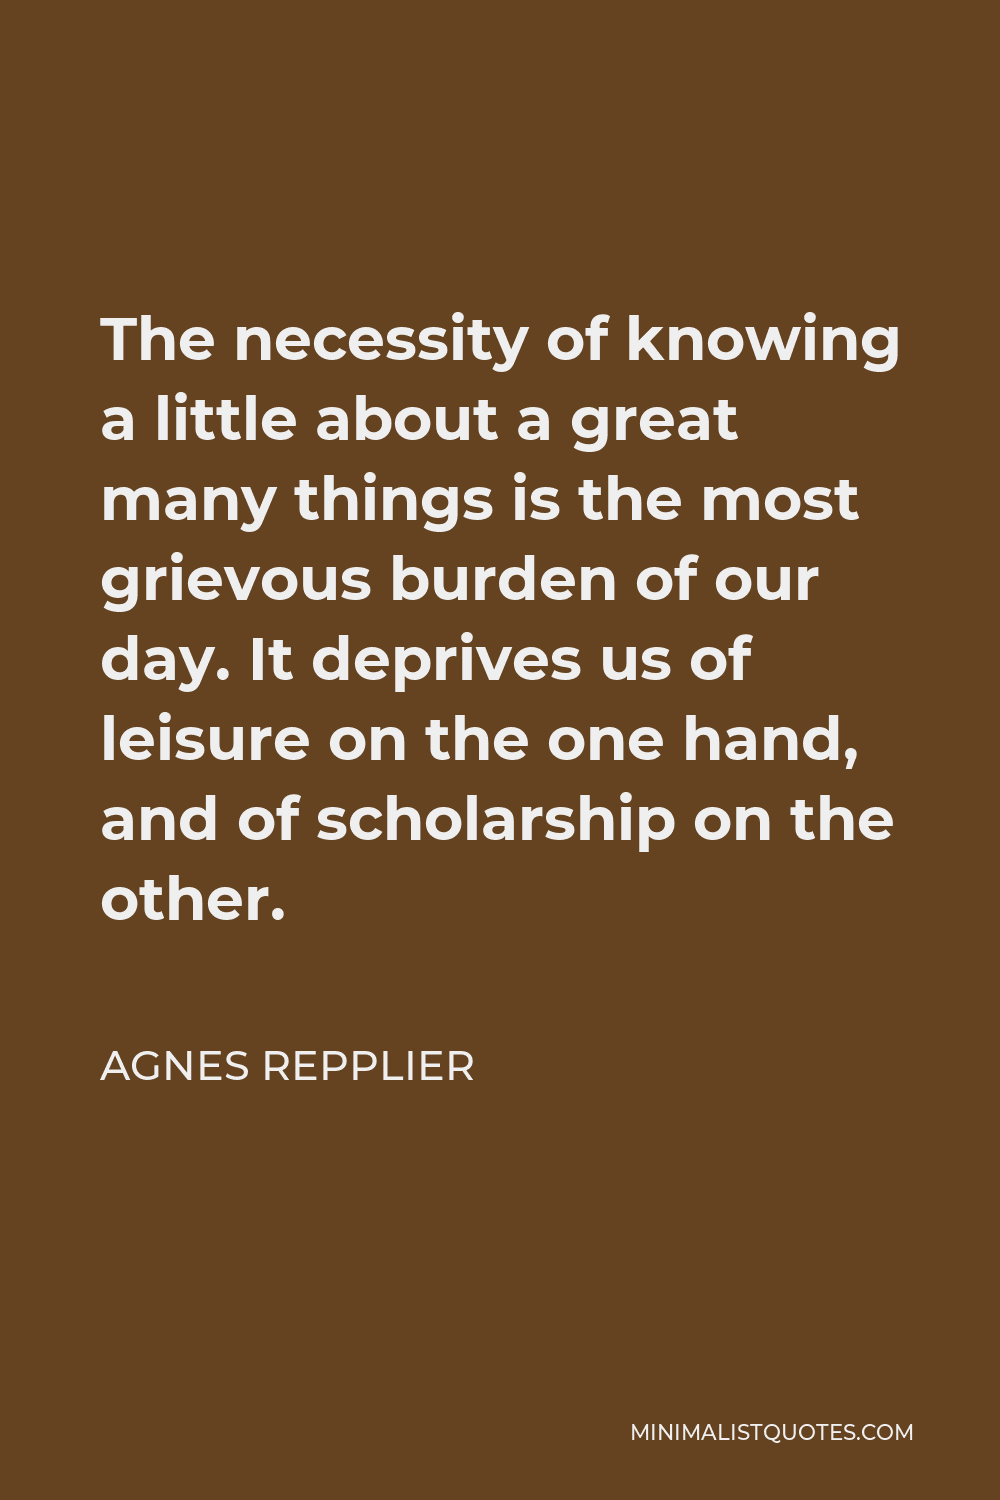 Agnes Repplier Quote - The necessity of knowing a little about a great many things is the most grievous burden of our day. It deprives us of leisure on the one hand, and of scholarship on the other.